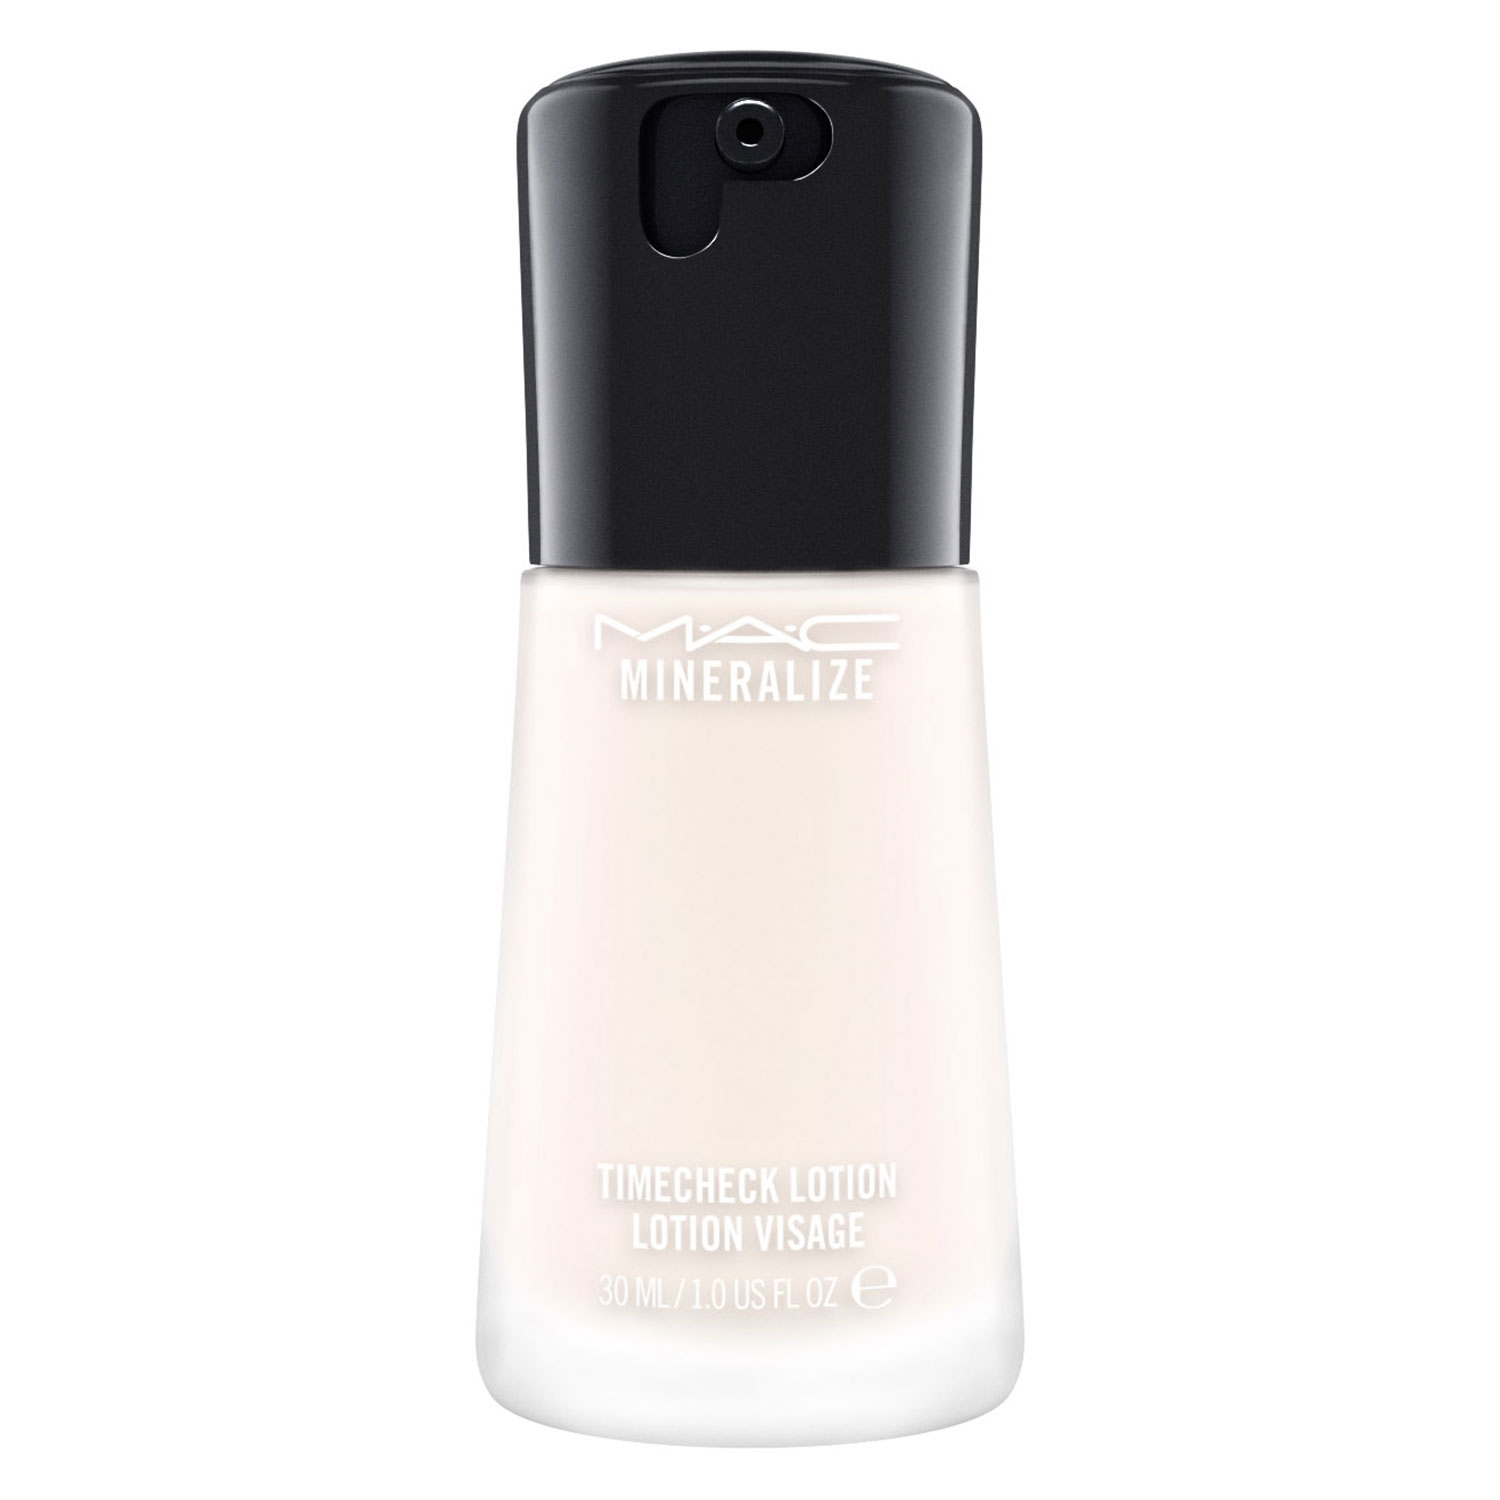 Product image from M·A·C Skin Care - Mineralize Timecheck Lotion